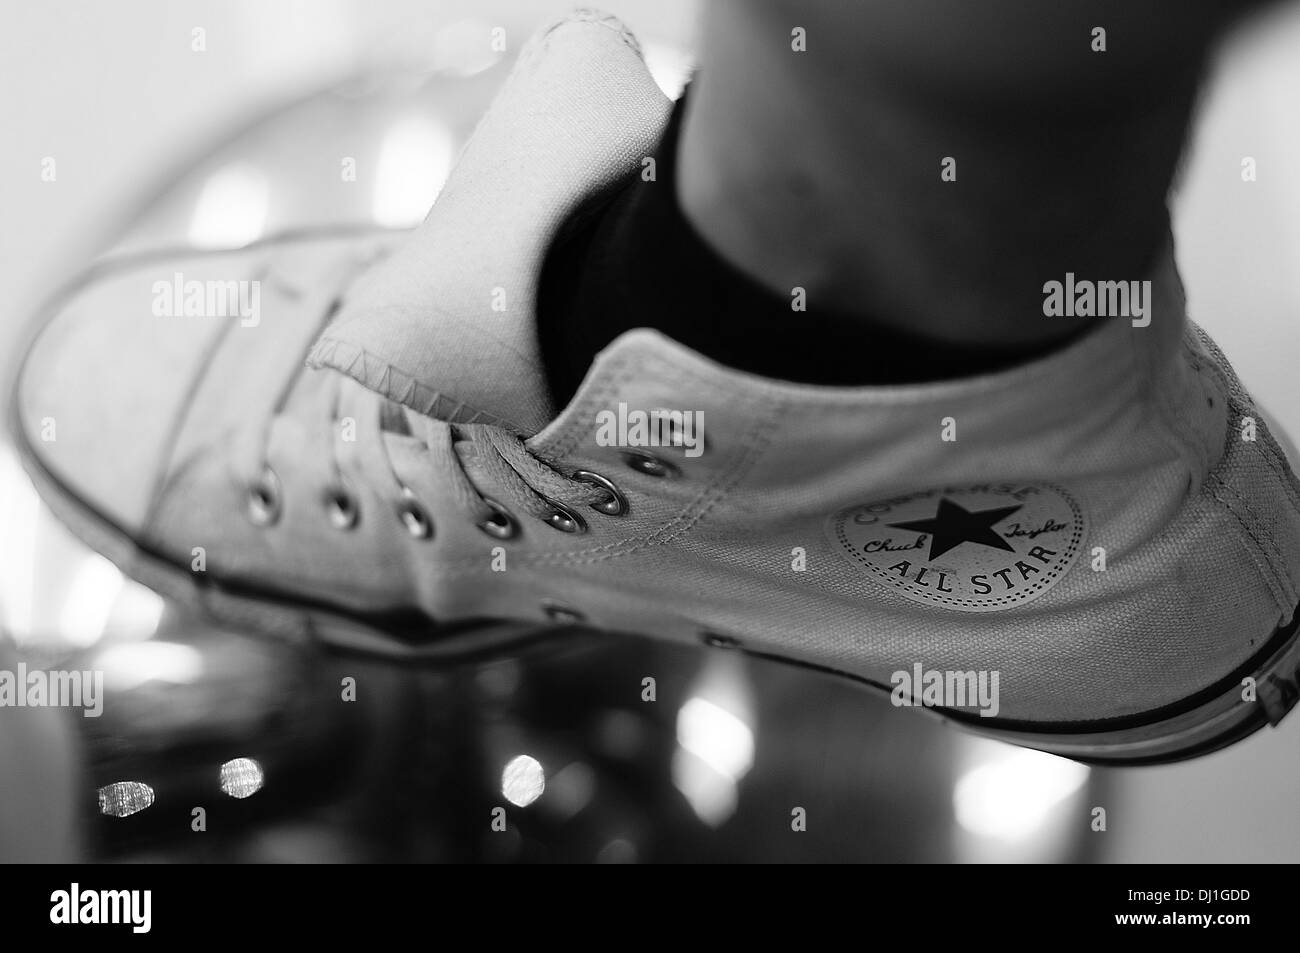 Converse All Star blanc boot Banque D'Images